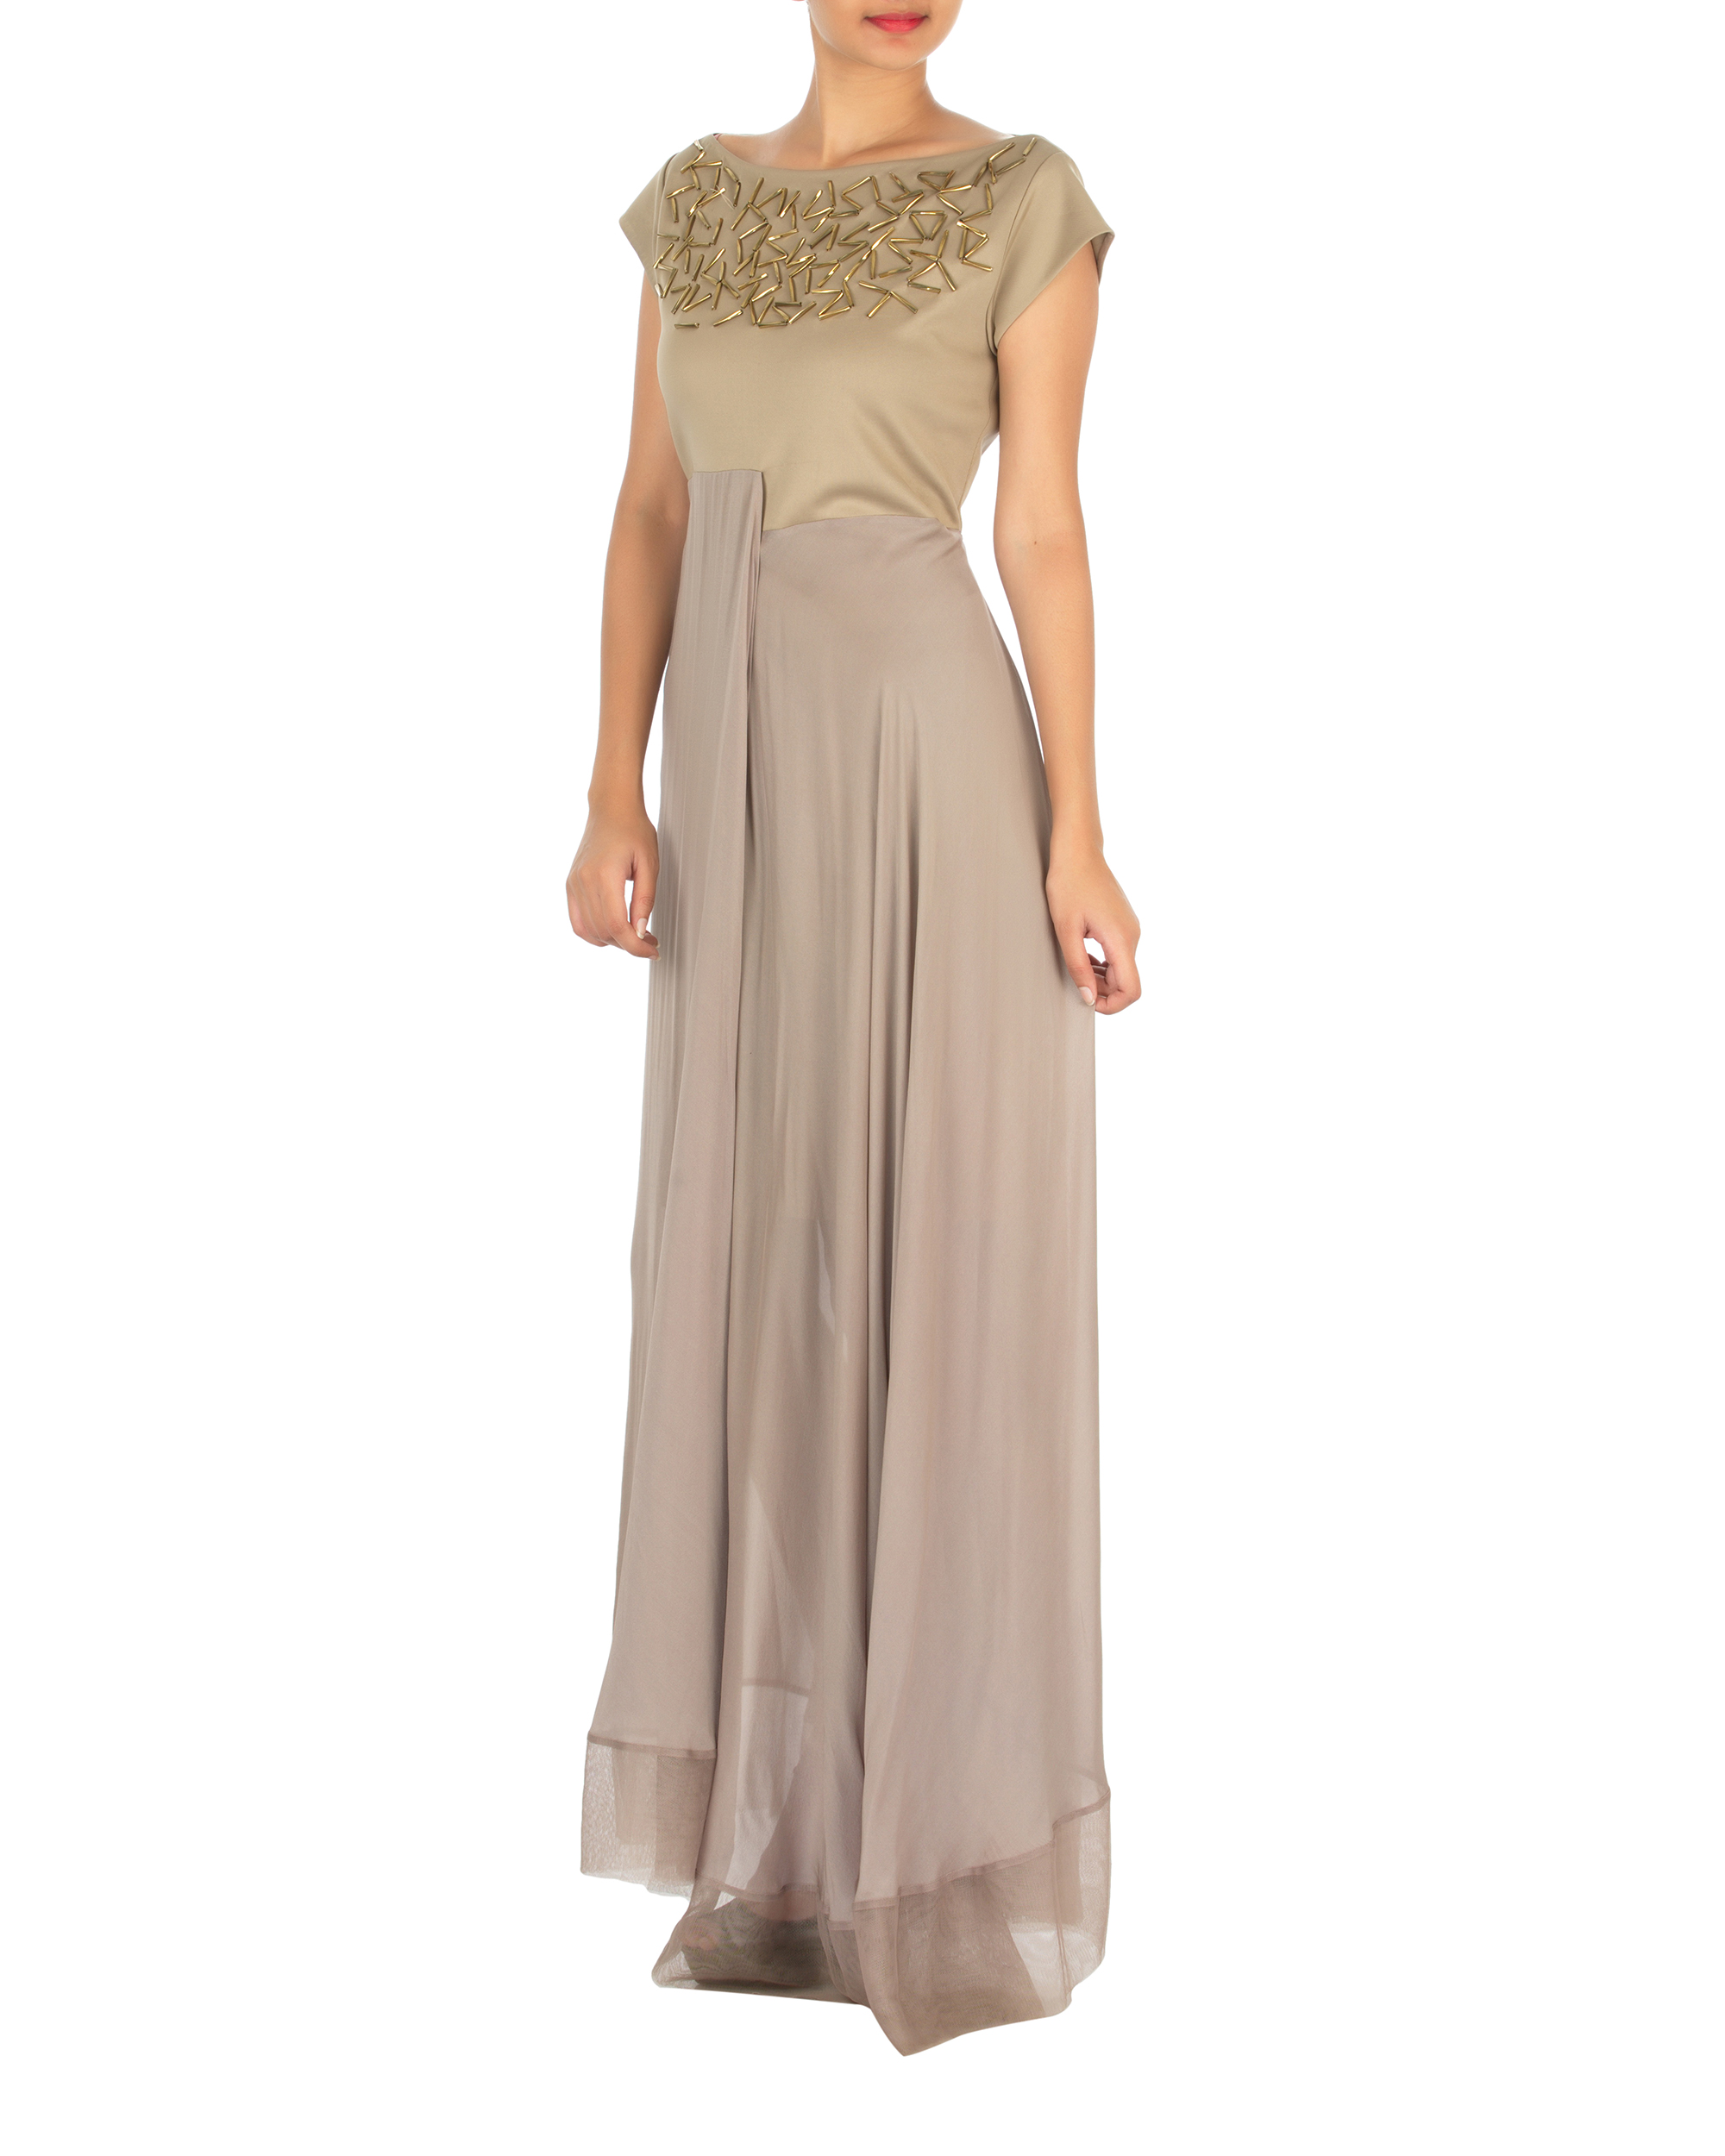 Three panelled beige gown by Megha Garg | The Secret Label